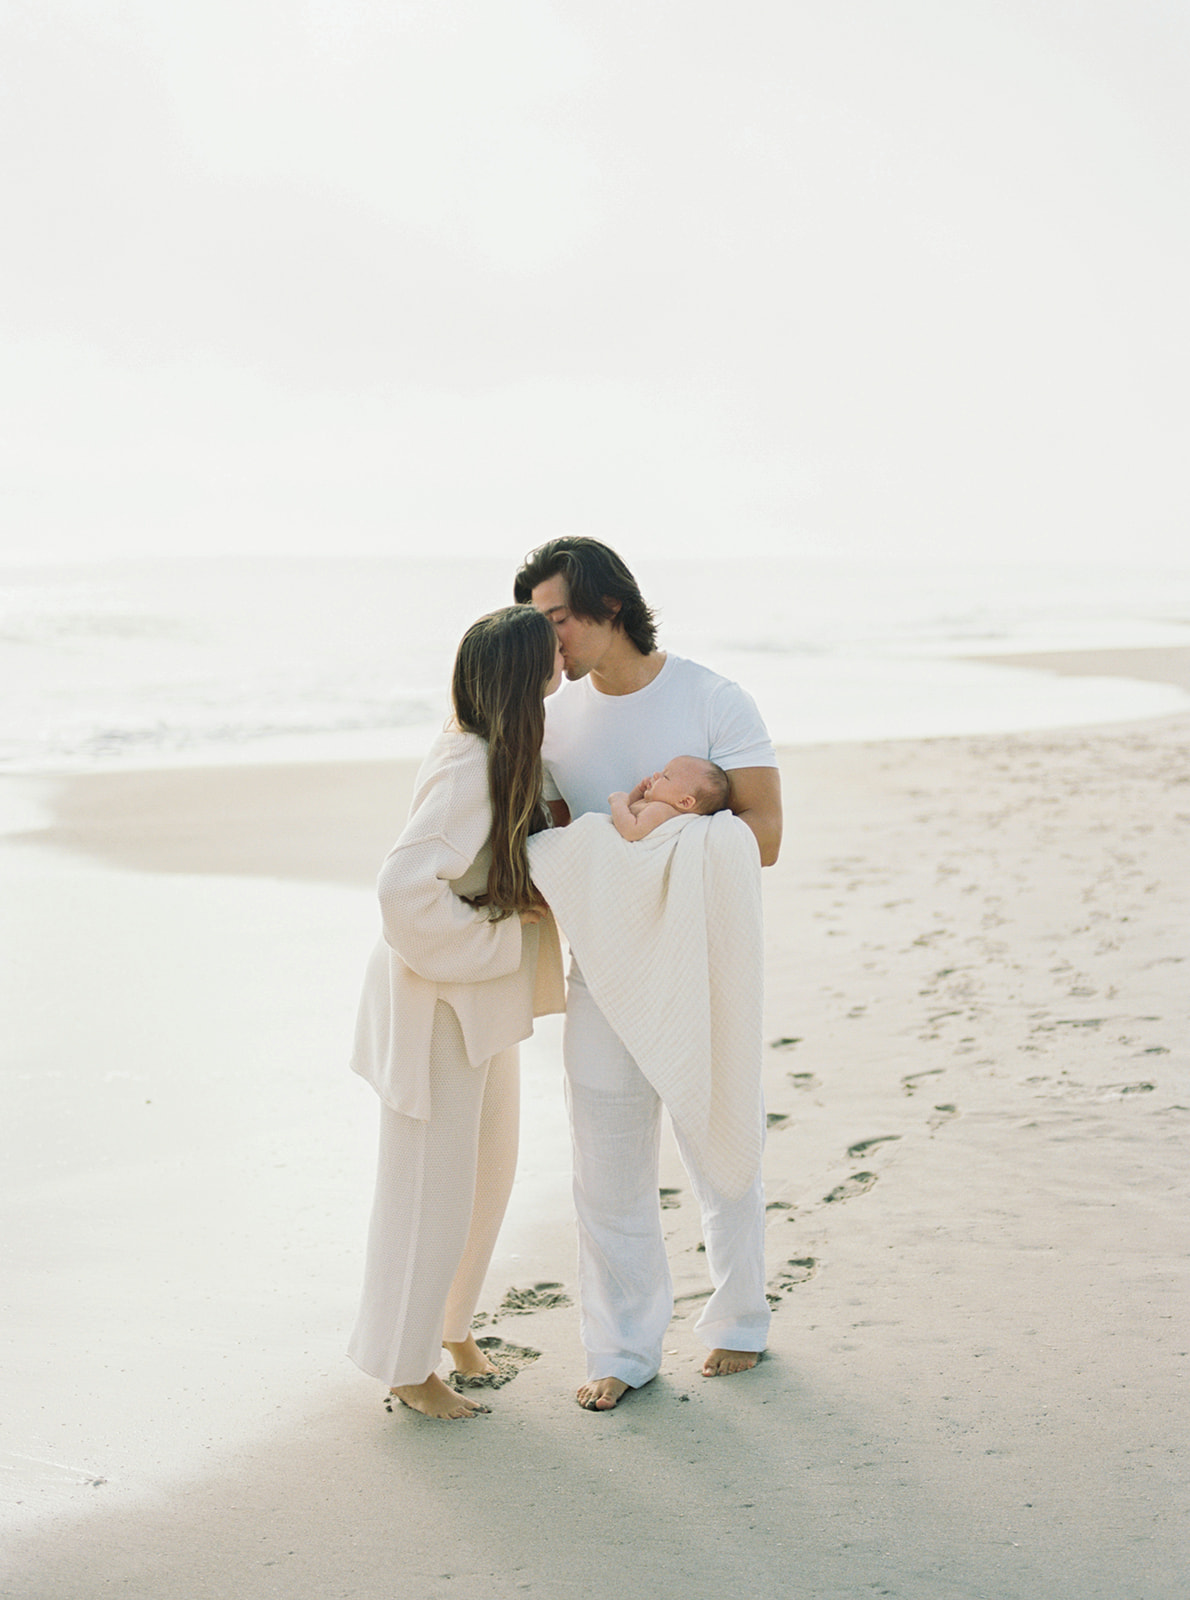 Mom and dad kissing on a hazy beach morning while dad is holding newborn baby wrapped in organic blanket.